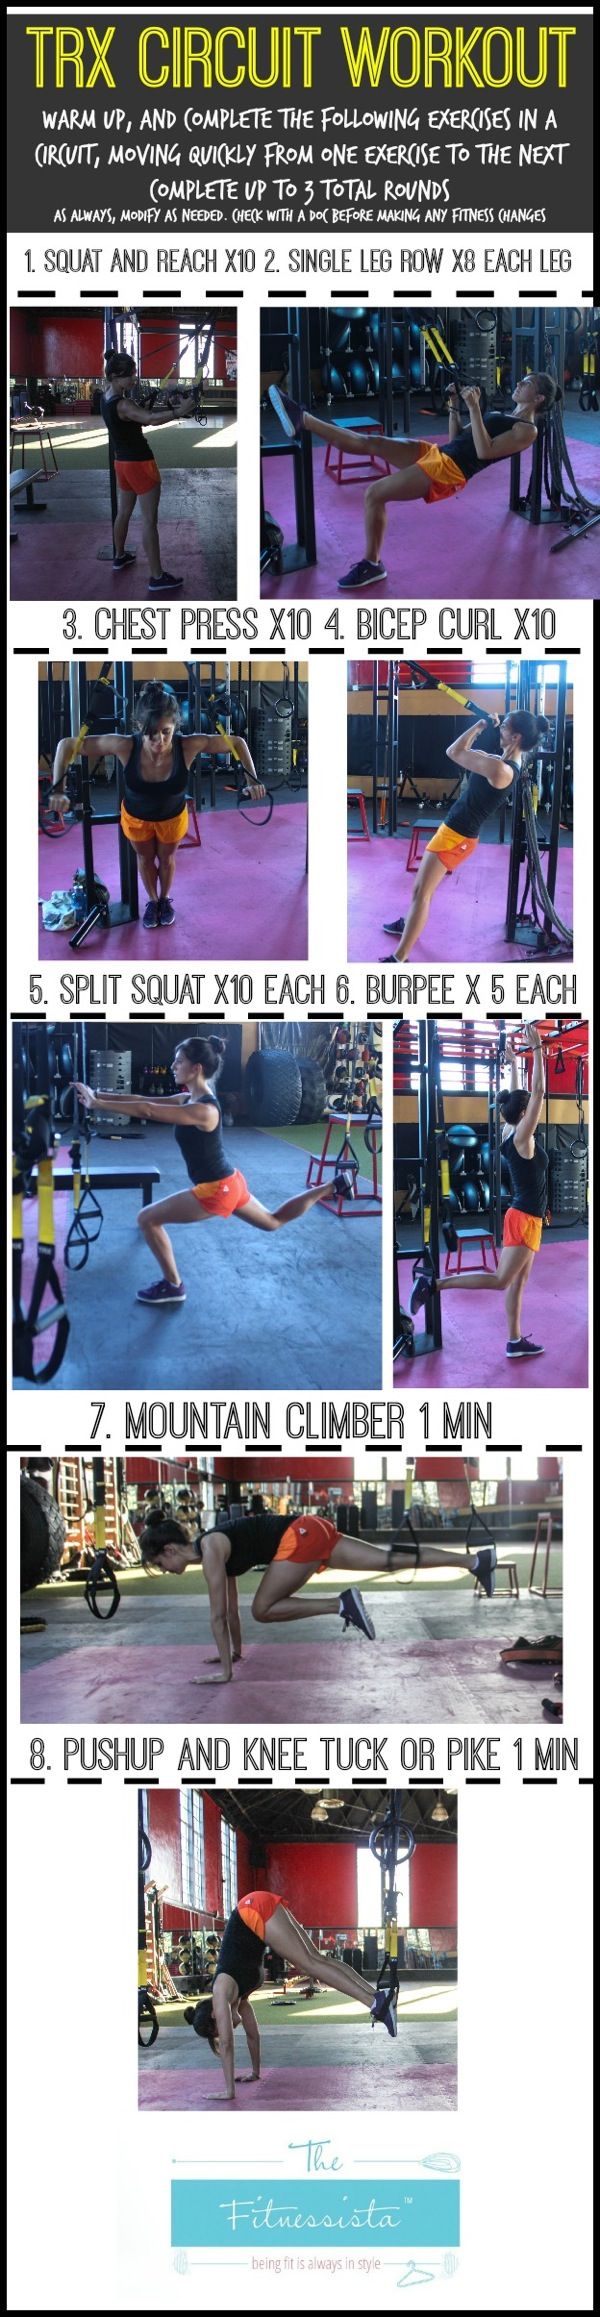 complete guide to trx suspension training